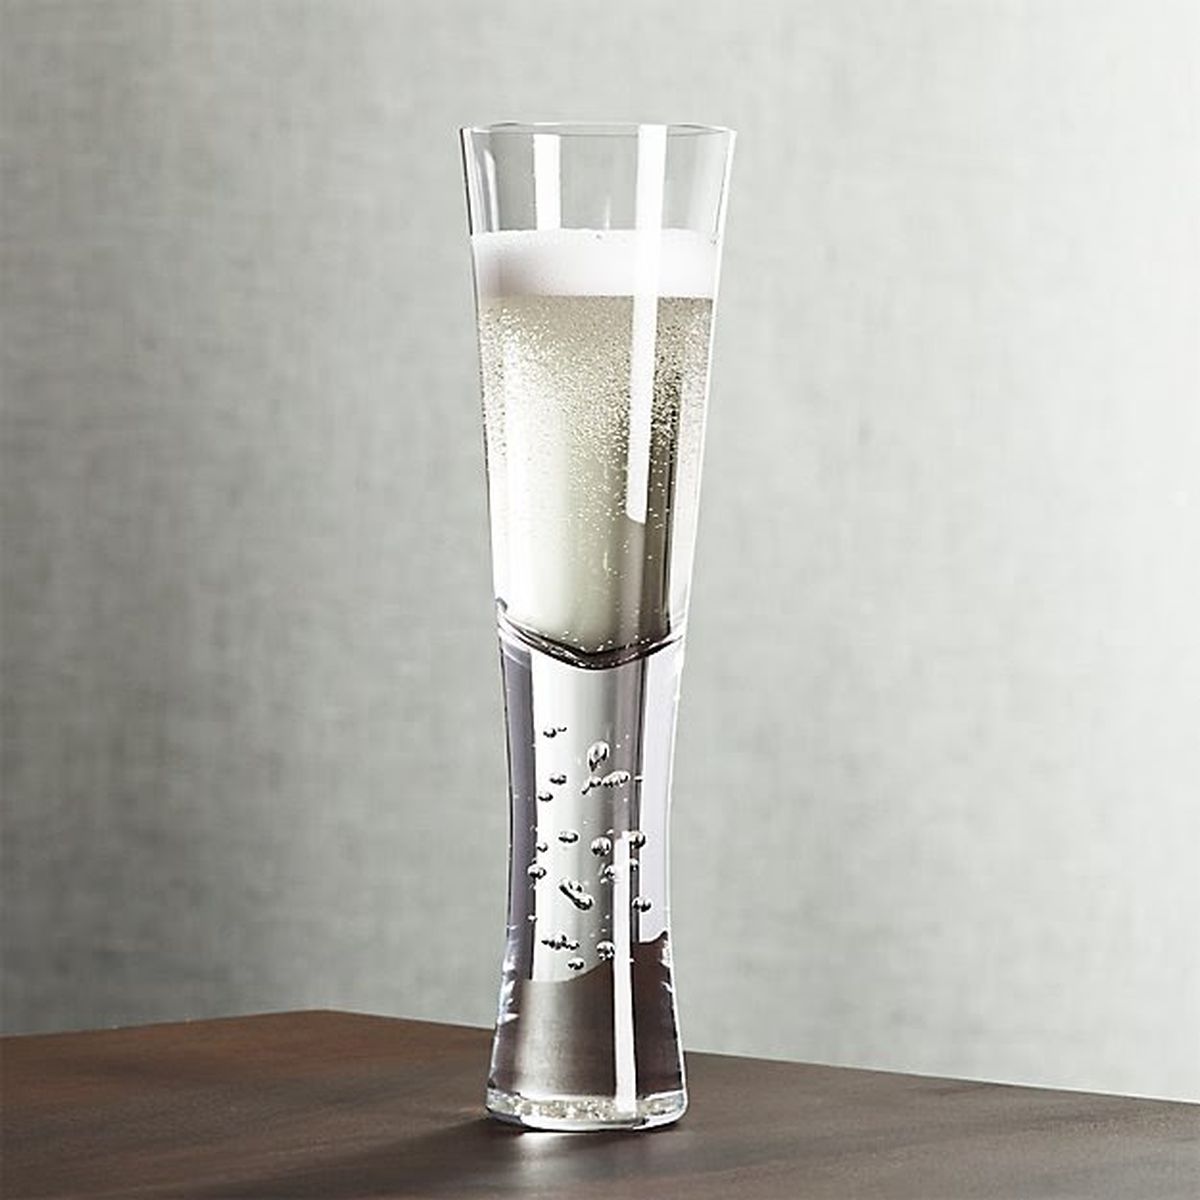 A champagne glass with a wide base on a brown table